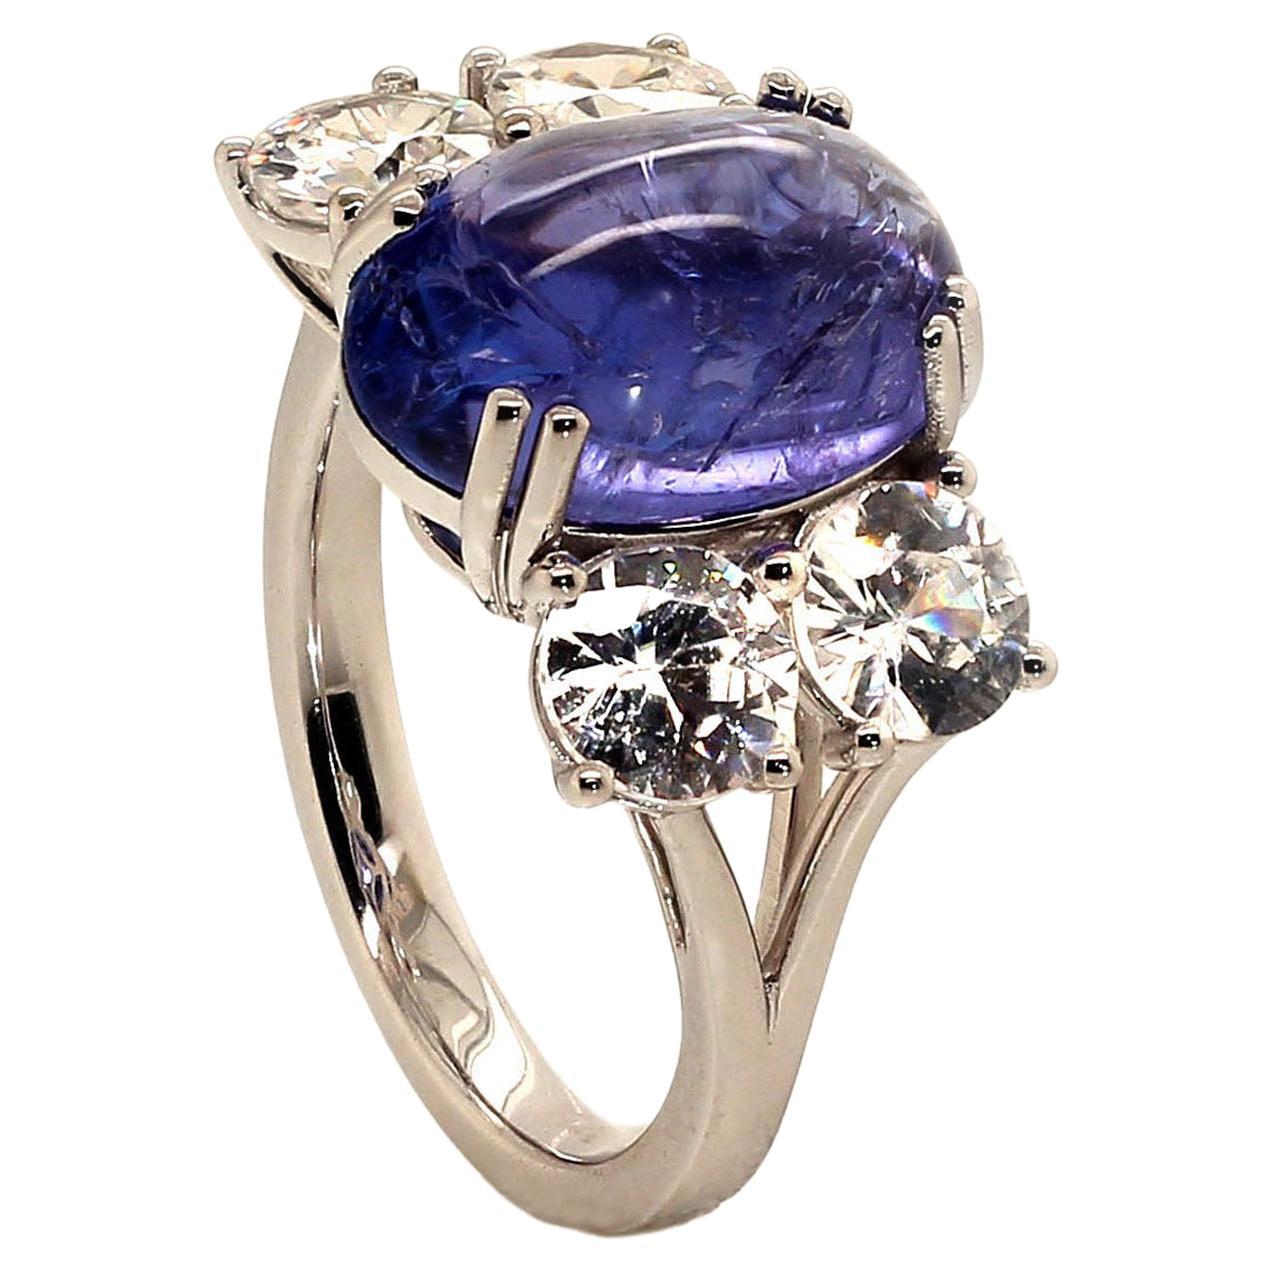 Artisan AJD Dinner Ring of Cabochon Tanzanite and Sparkling Genuine Zircons For Sale